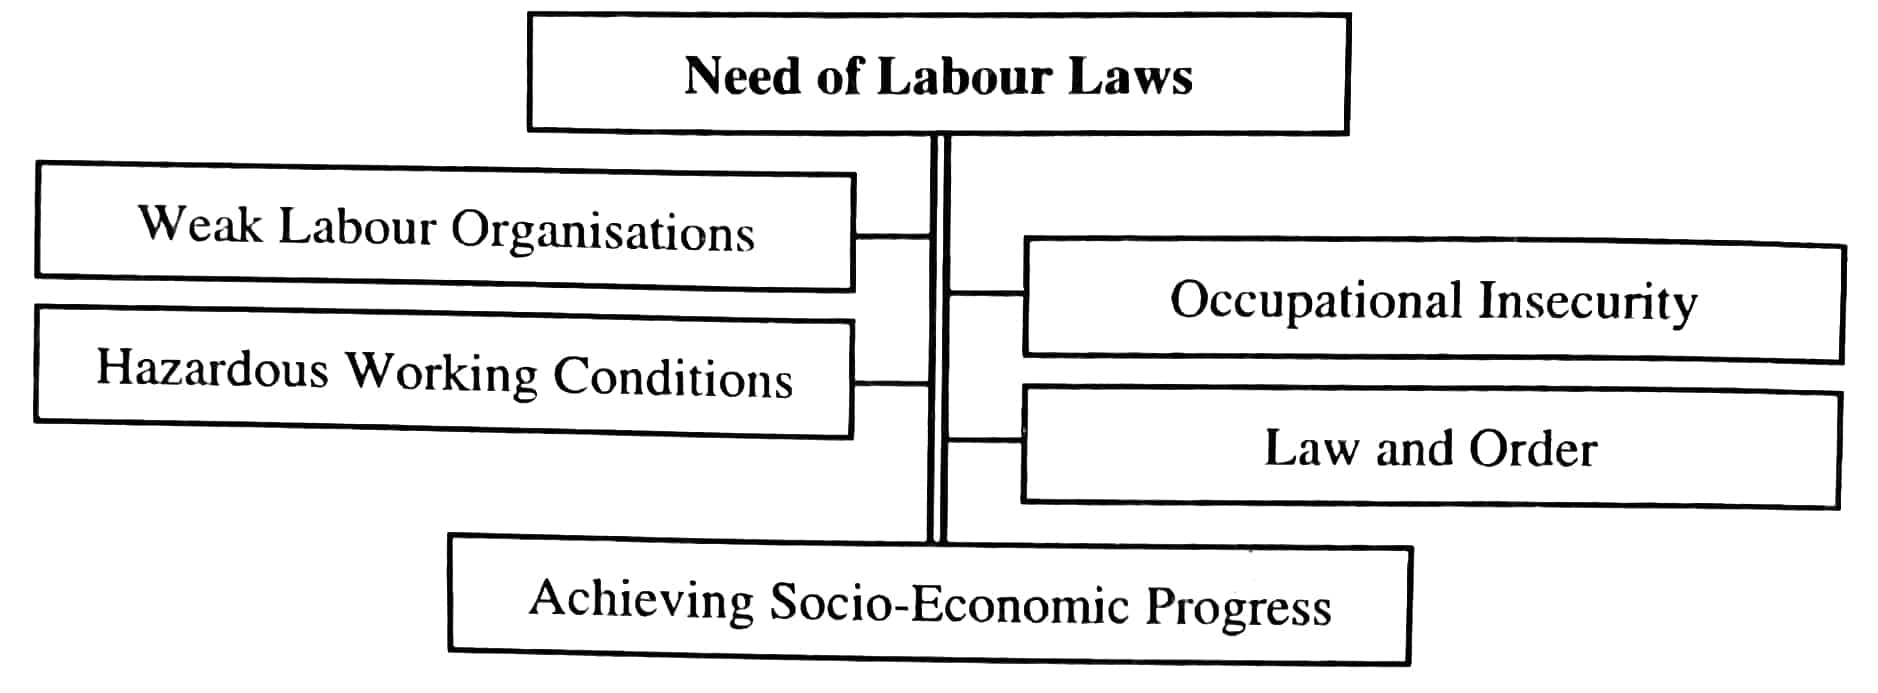 Need of Labour Laws